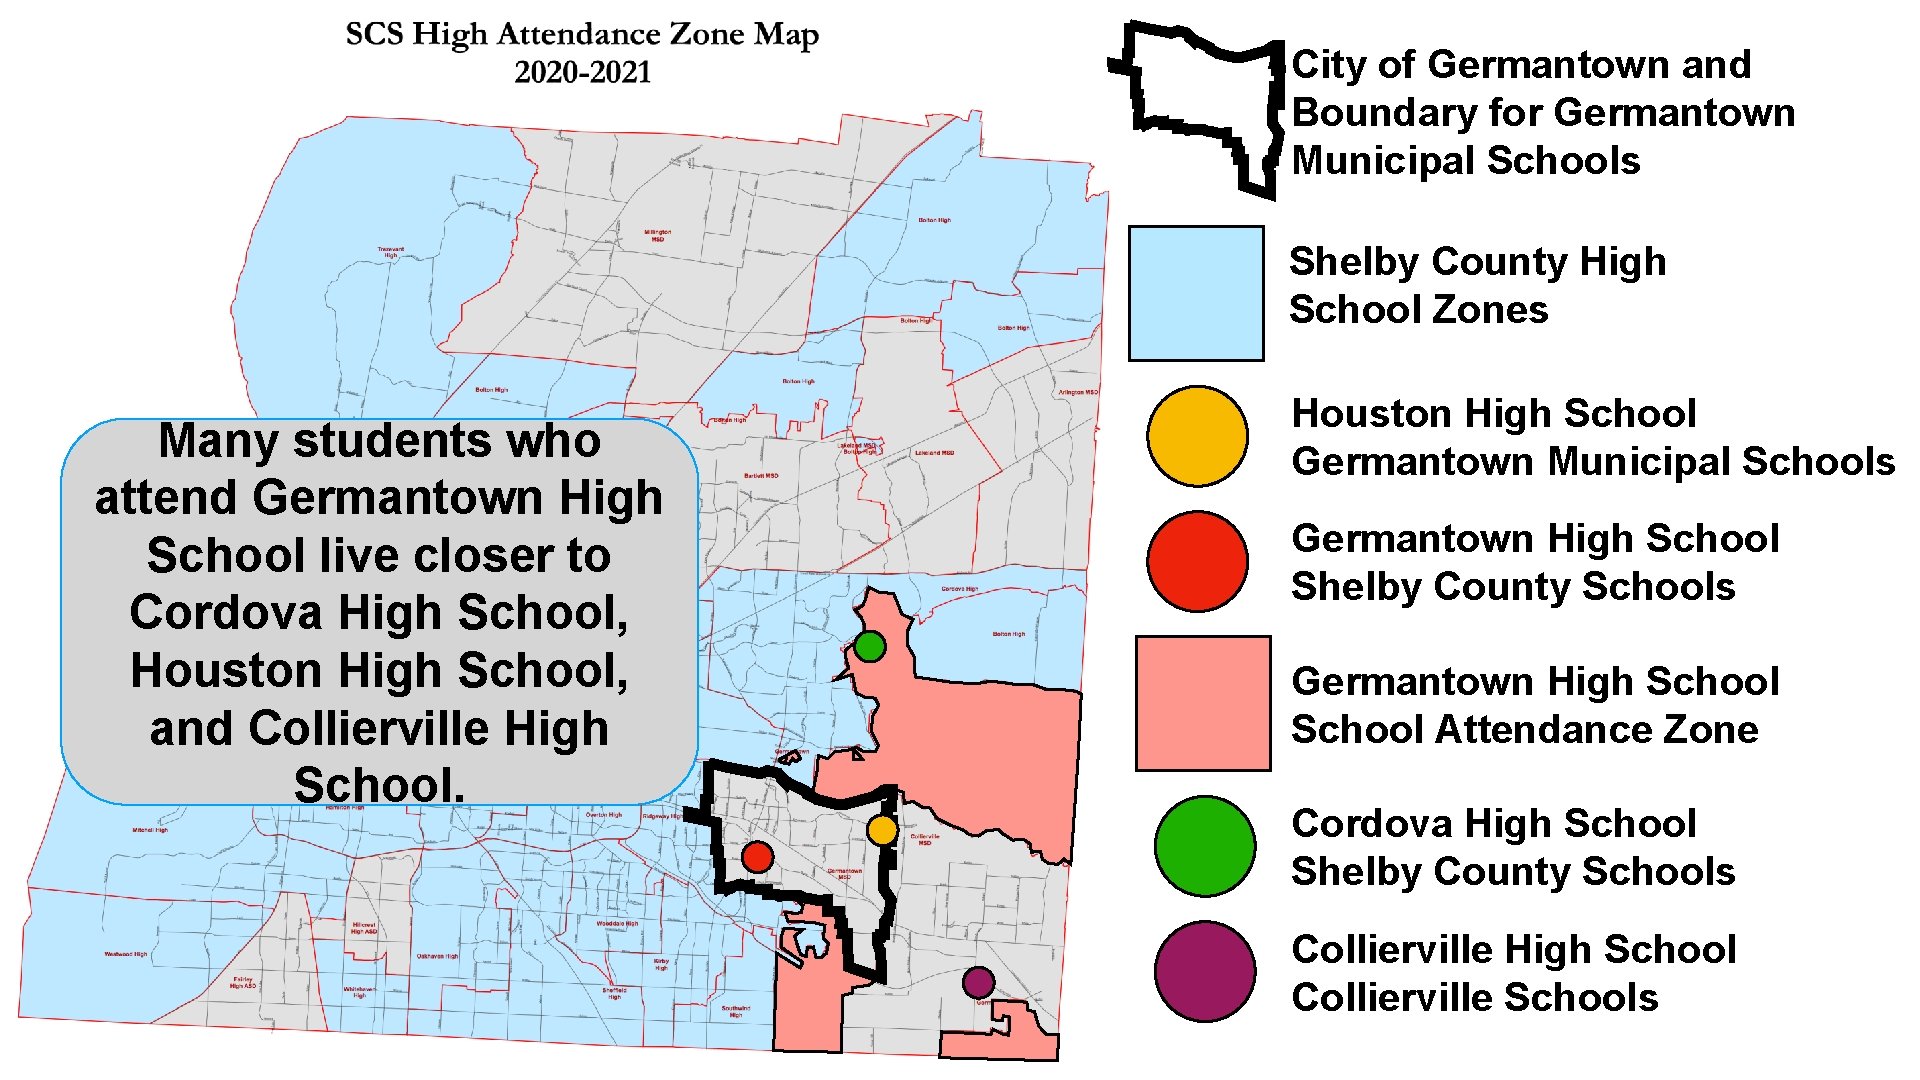 City of Germantown and Boundary for Germantown Municipal Schools Shelby County High School Zones